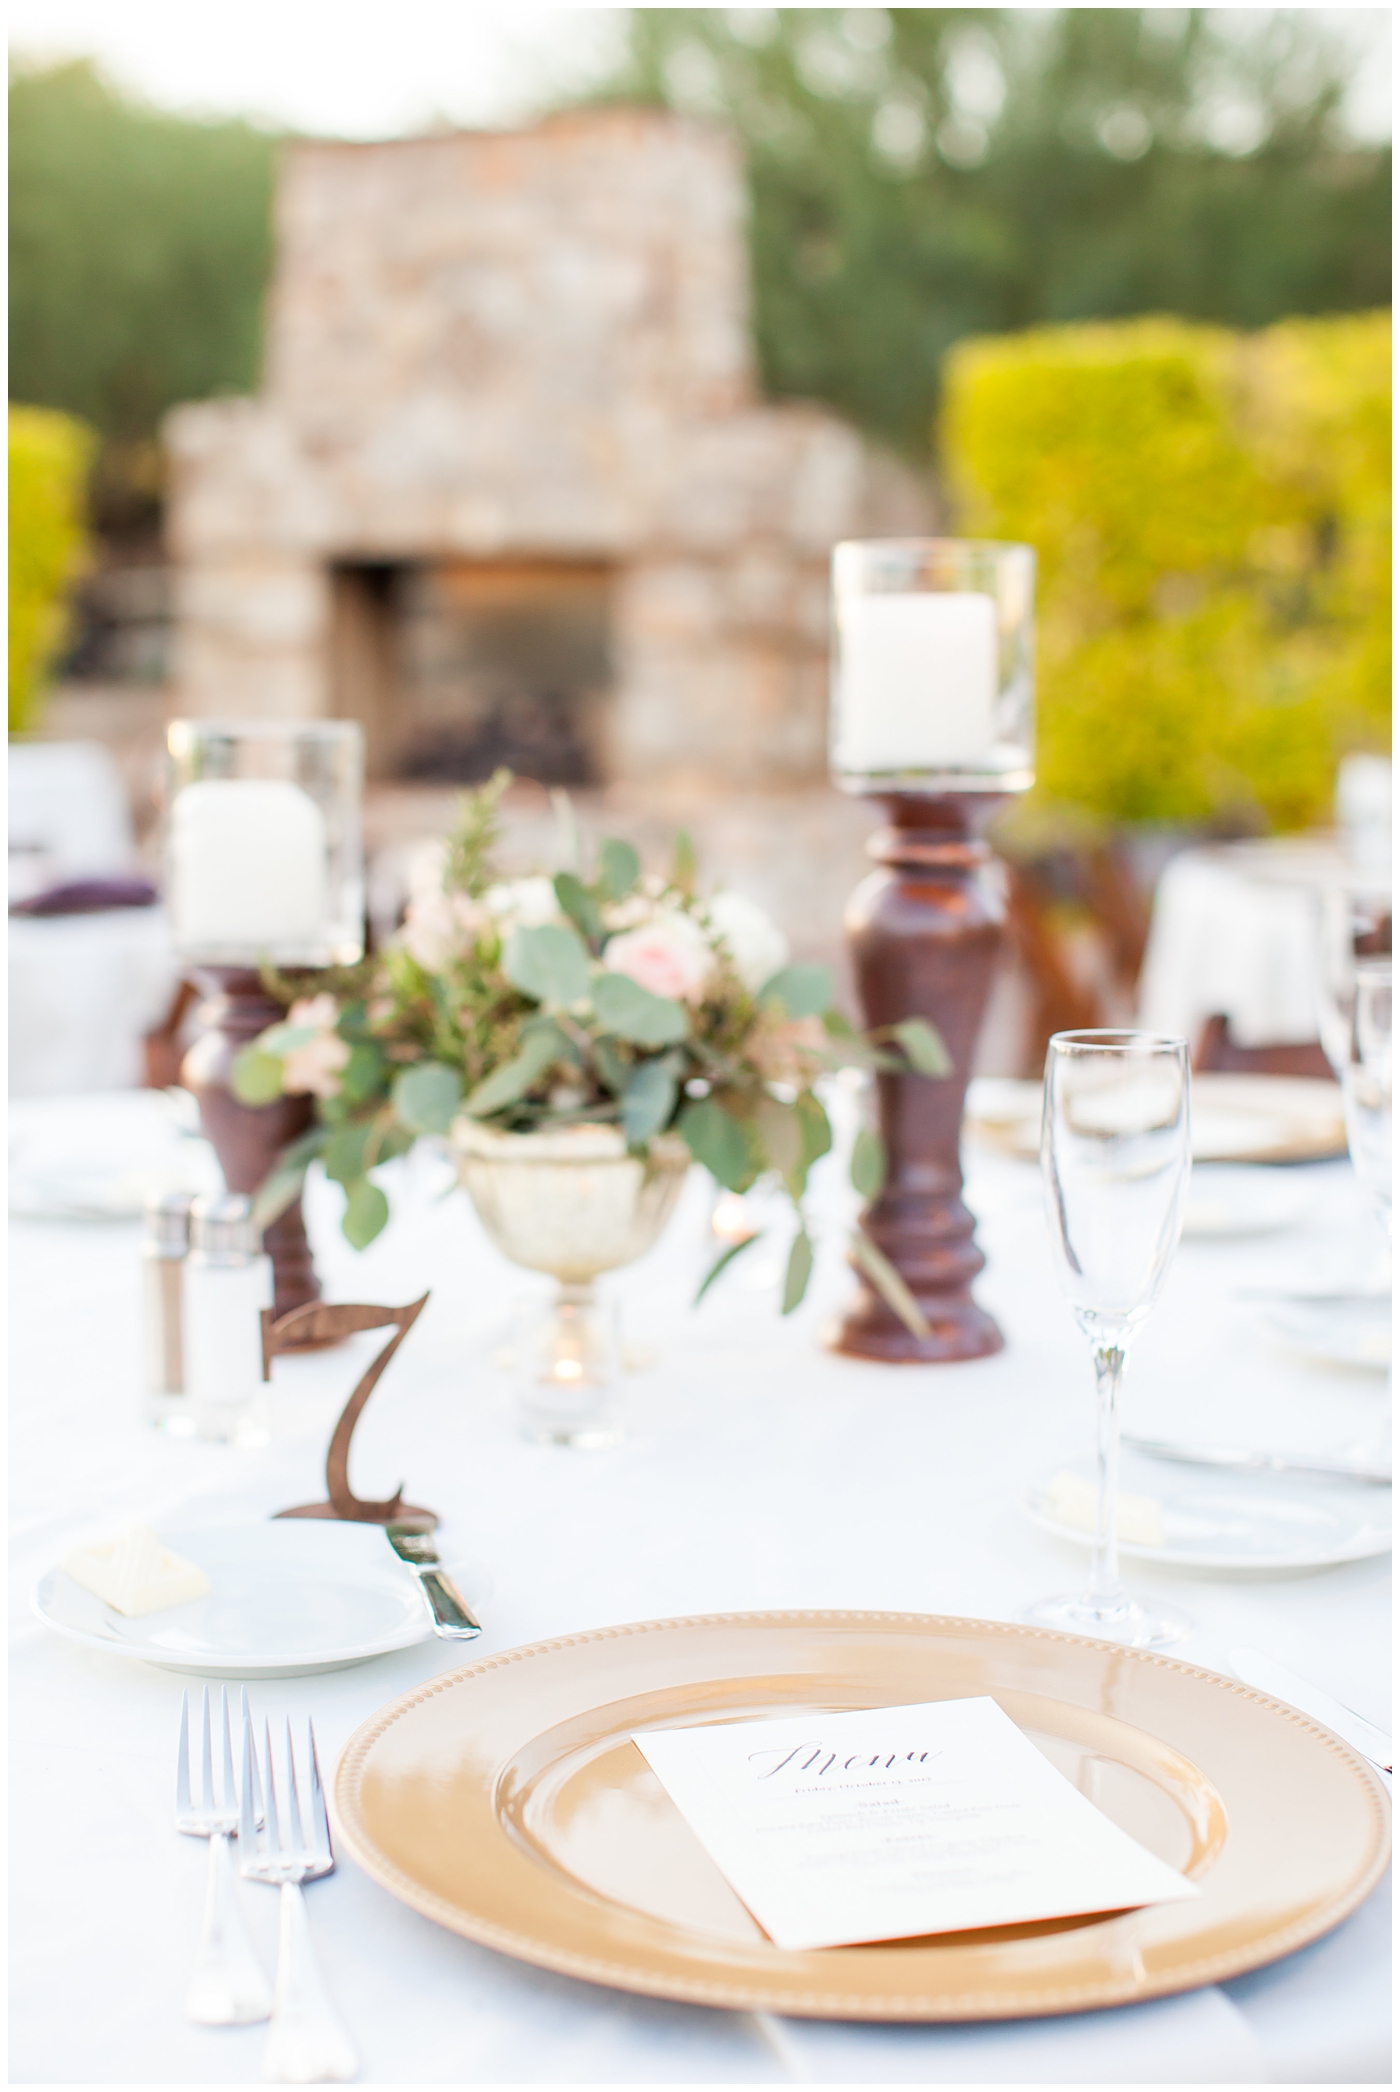 Elegant wedding table at reception with gold chargers and greenery